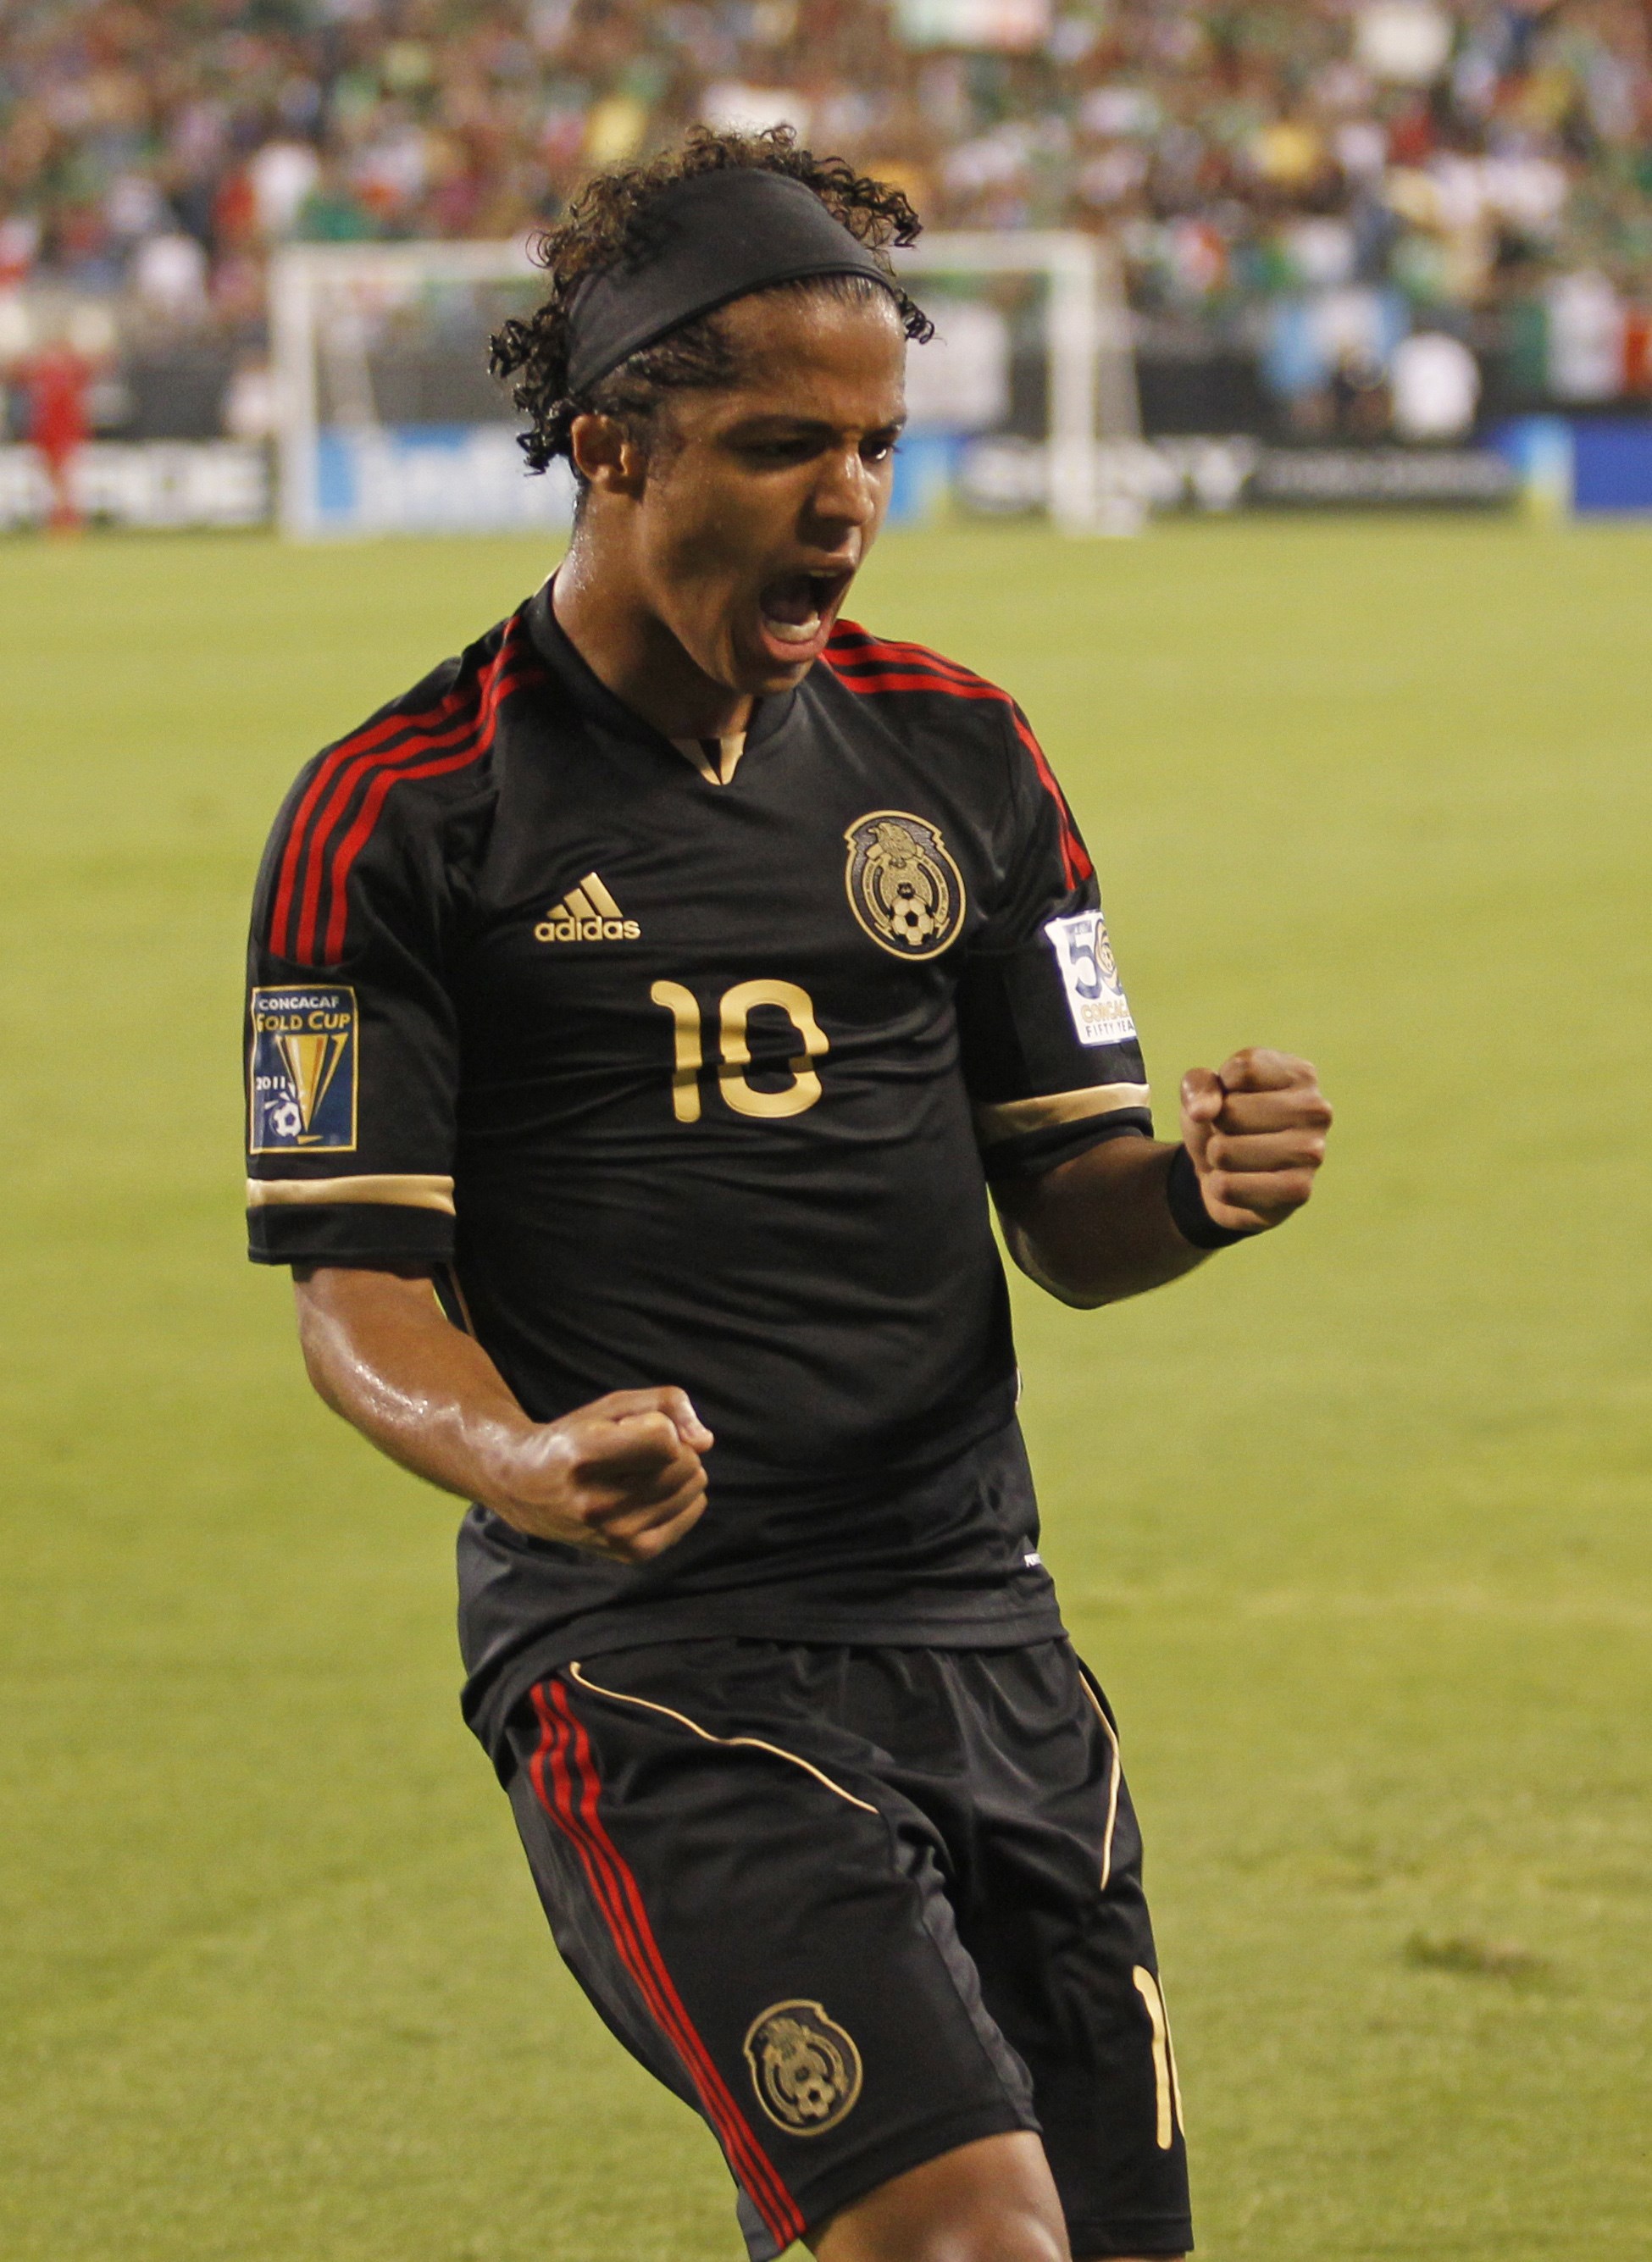 Giovani Dos Santos | Known people - famous people news and biographies